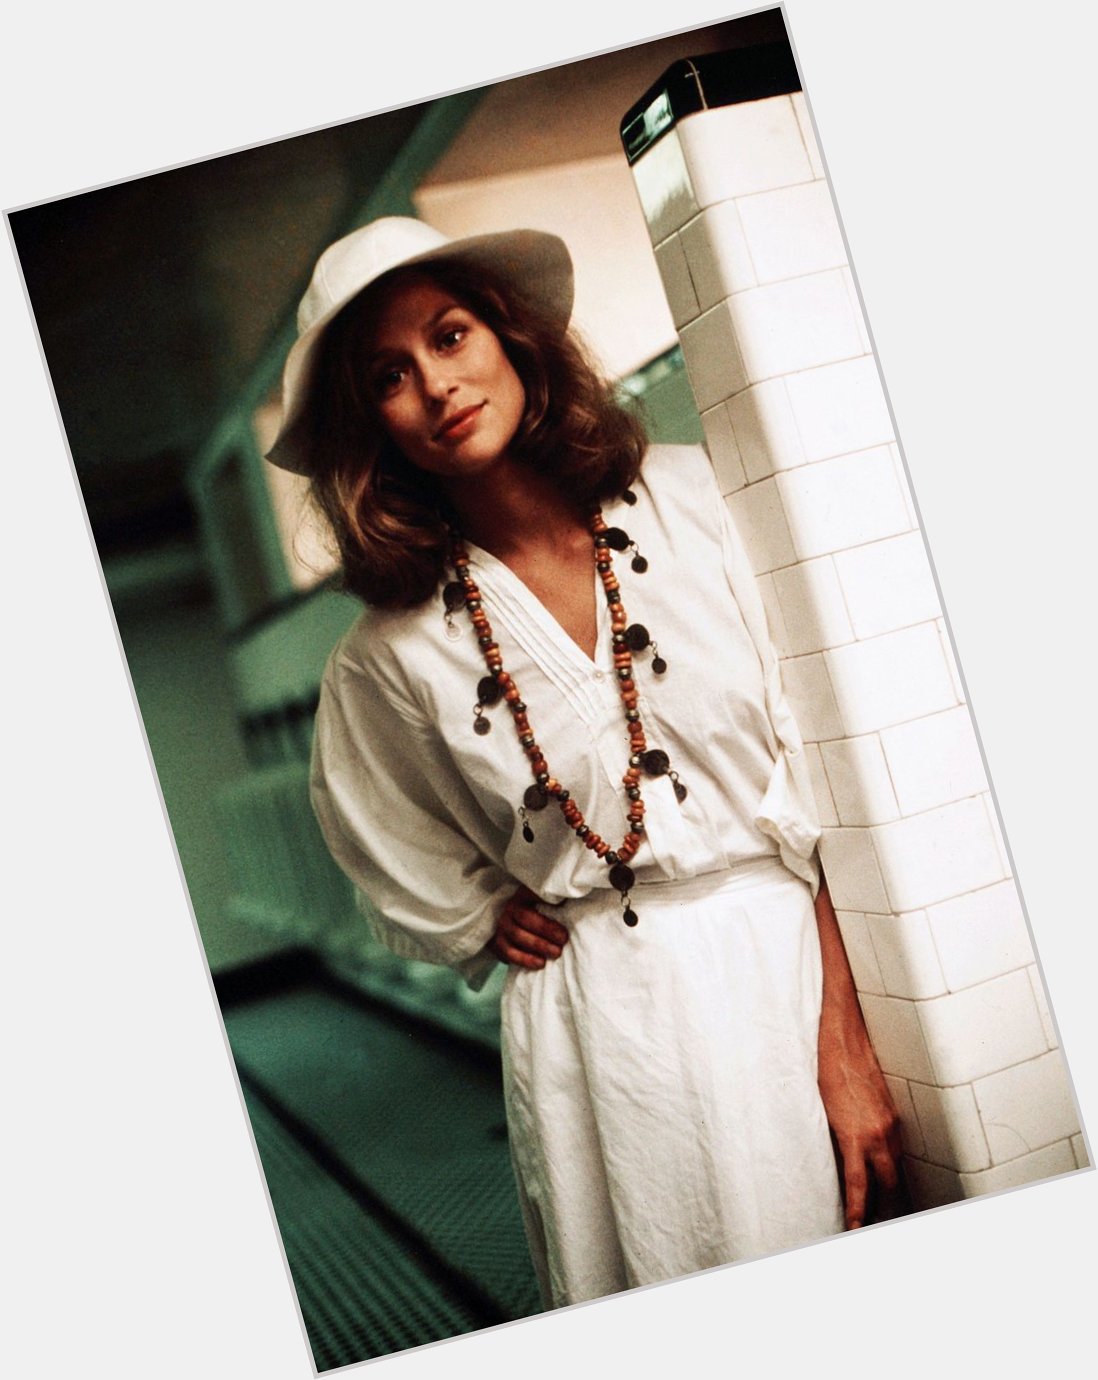 Happy Birthday to Lauren Hutton, iconic model and actress! 